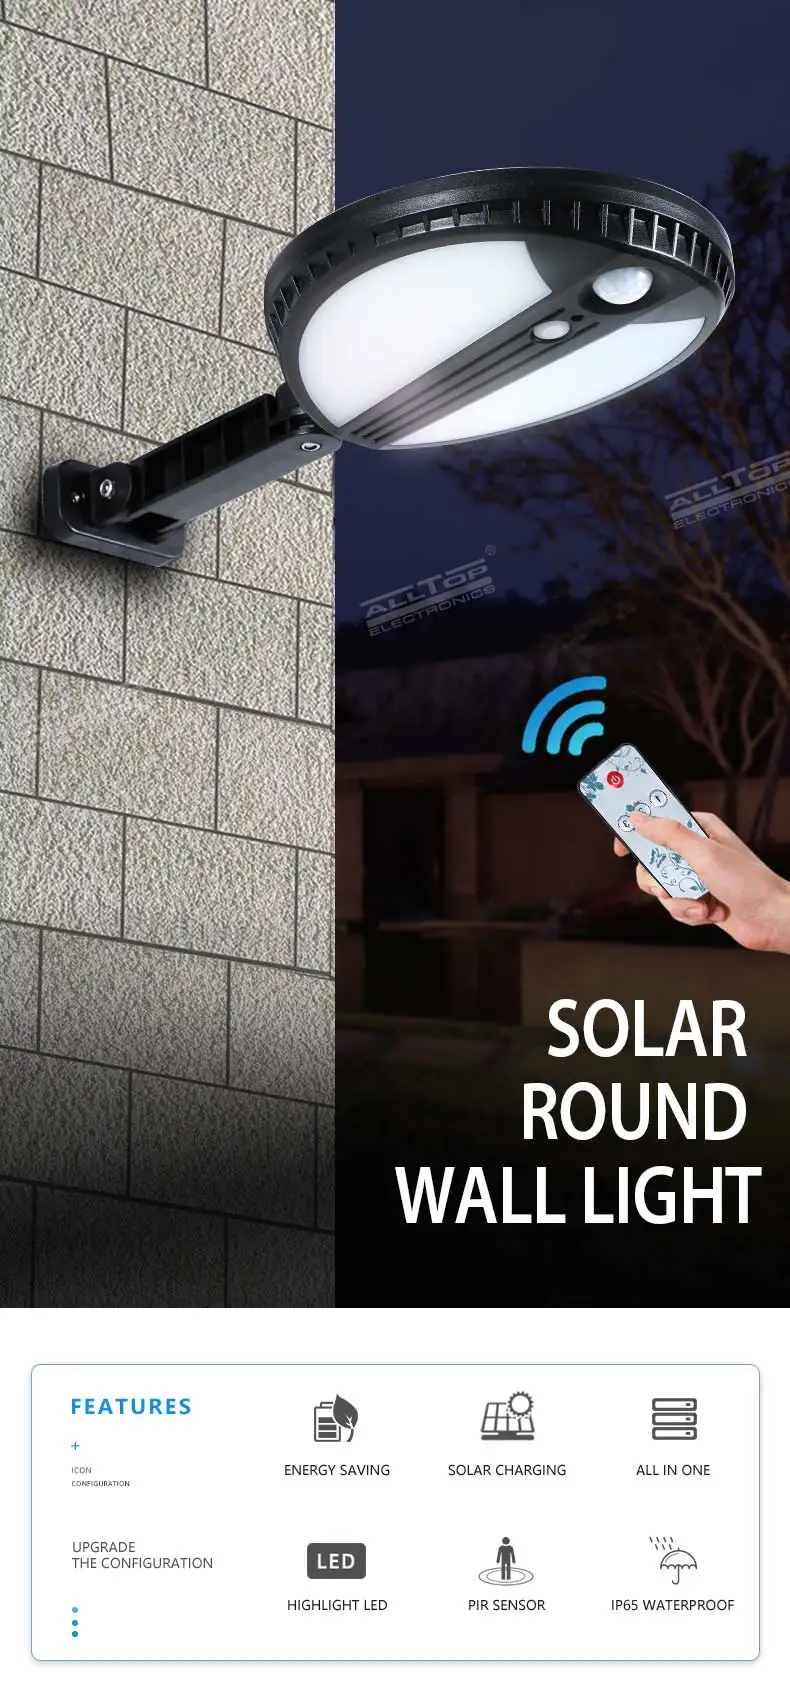 ALLTOP Hot selling ABS material 5w outdoor garden lighting solar led wall light with remote controller